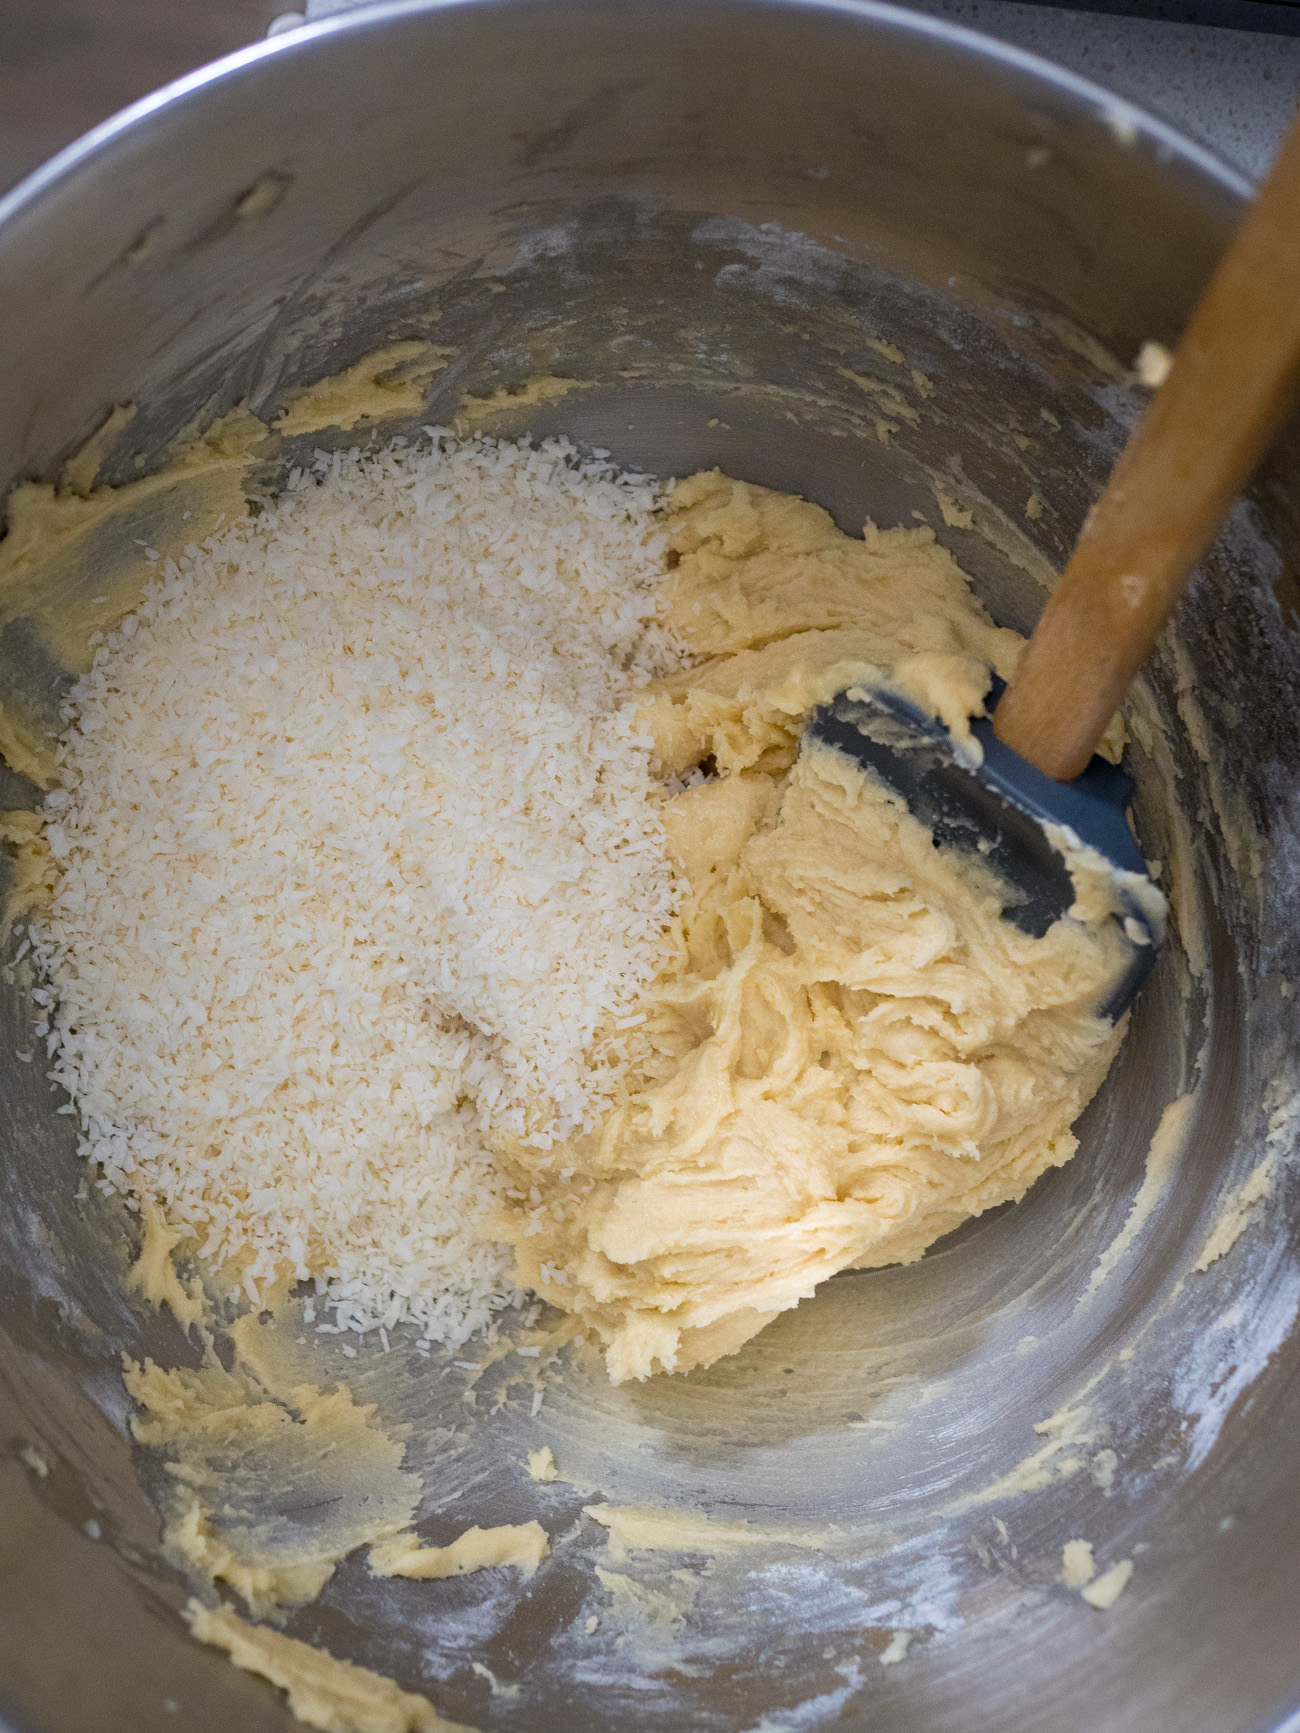 In a large mixing bowl cream together butter and sugar for cookies. Add in vanilla, egg, and milk and combine well. Slowly add flour to wet ingredients until just combined. Fold in un-toasted, shredded coconut.